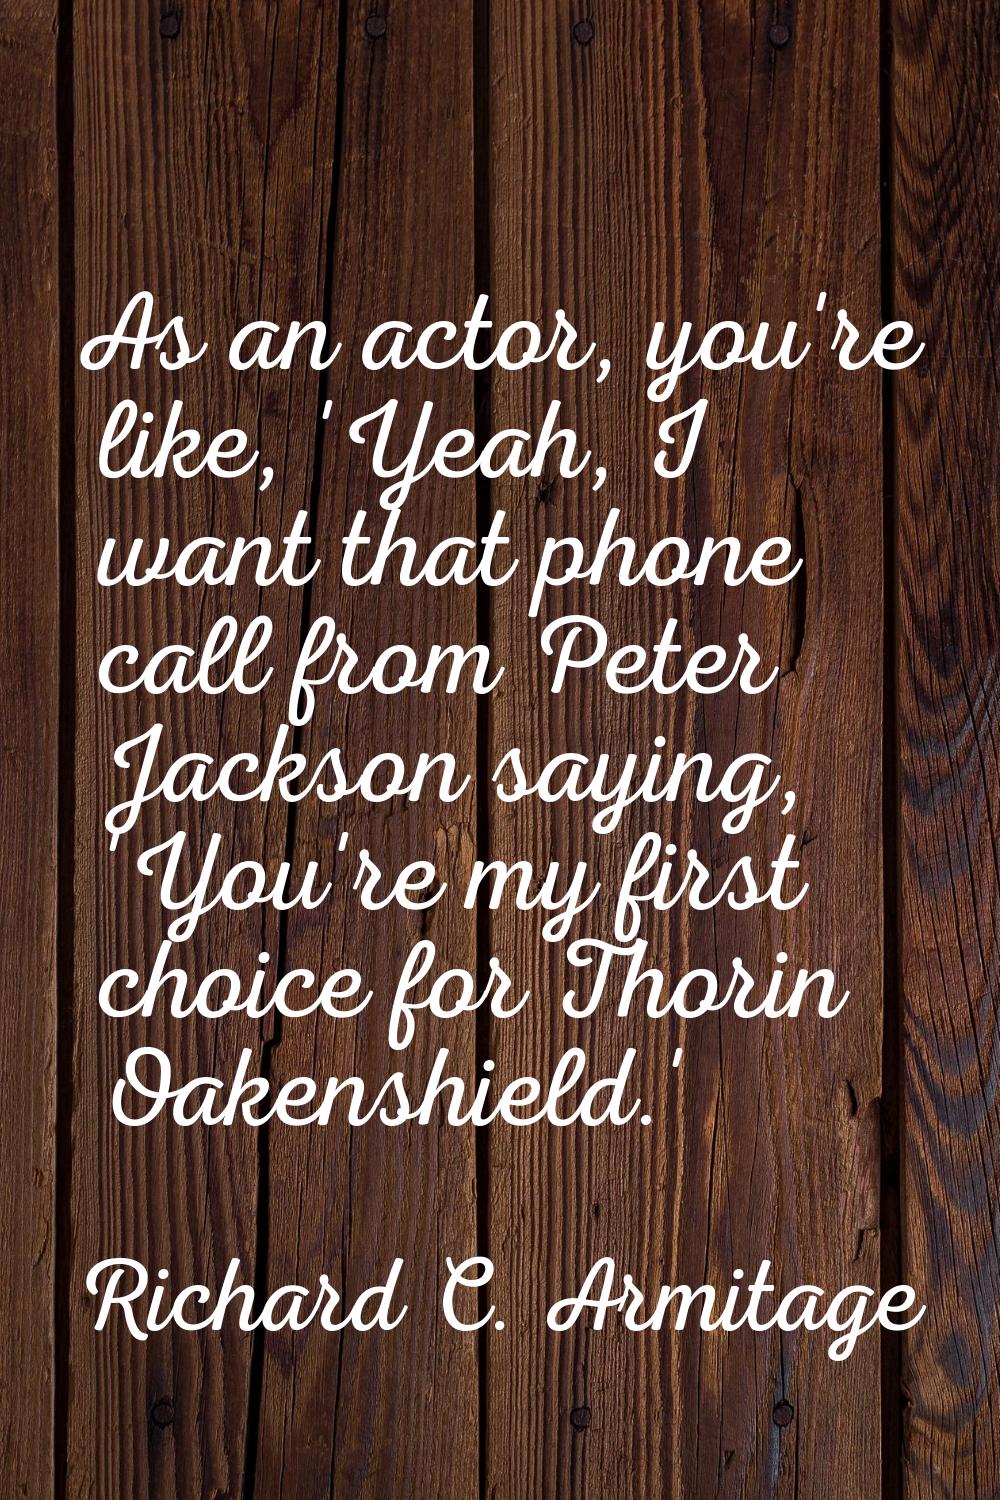 As an actor, you're like, 'Yeah, I want that phone call from Peter Jackson saying, 'You're my first